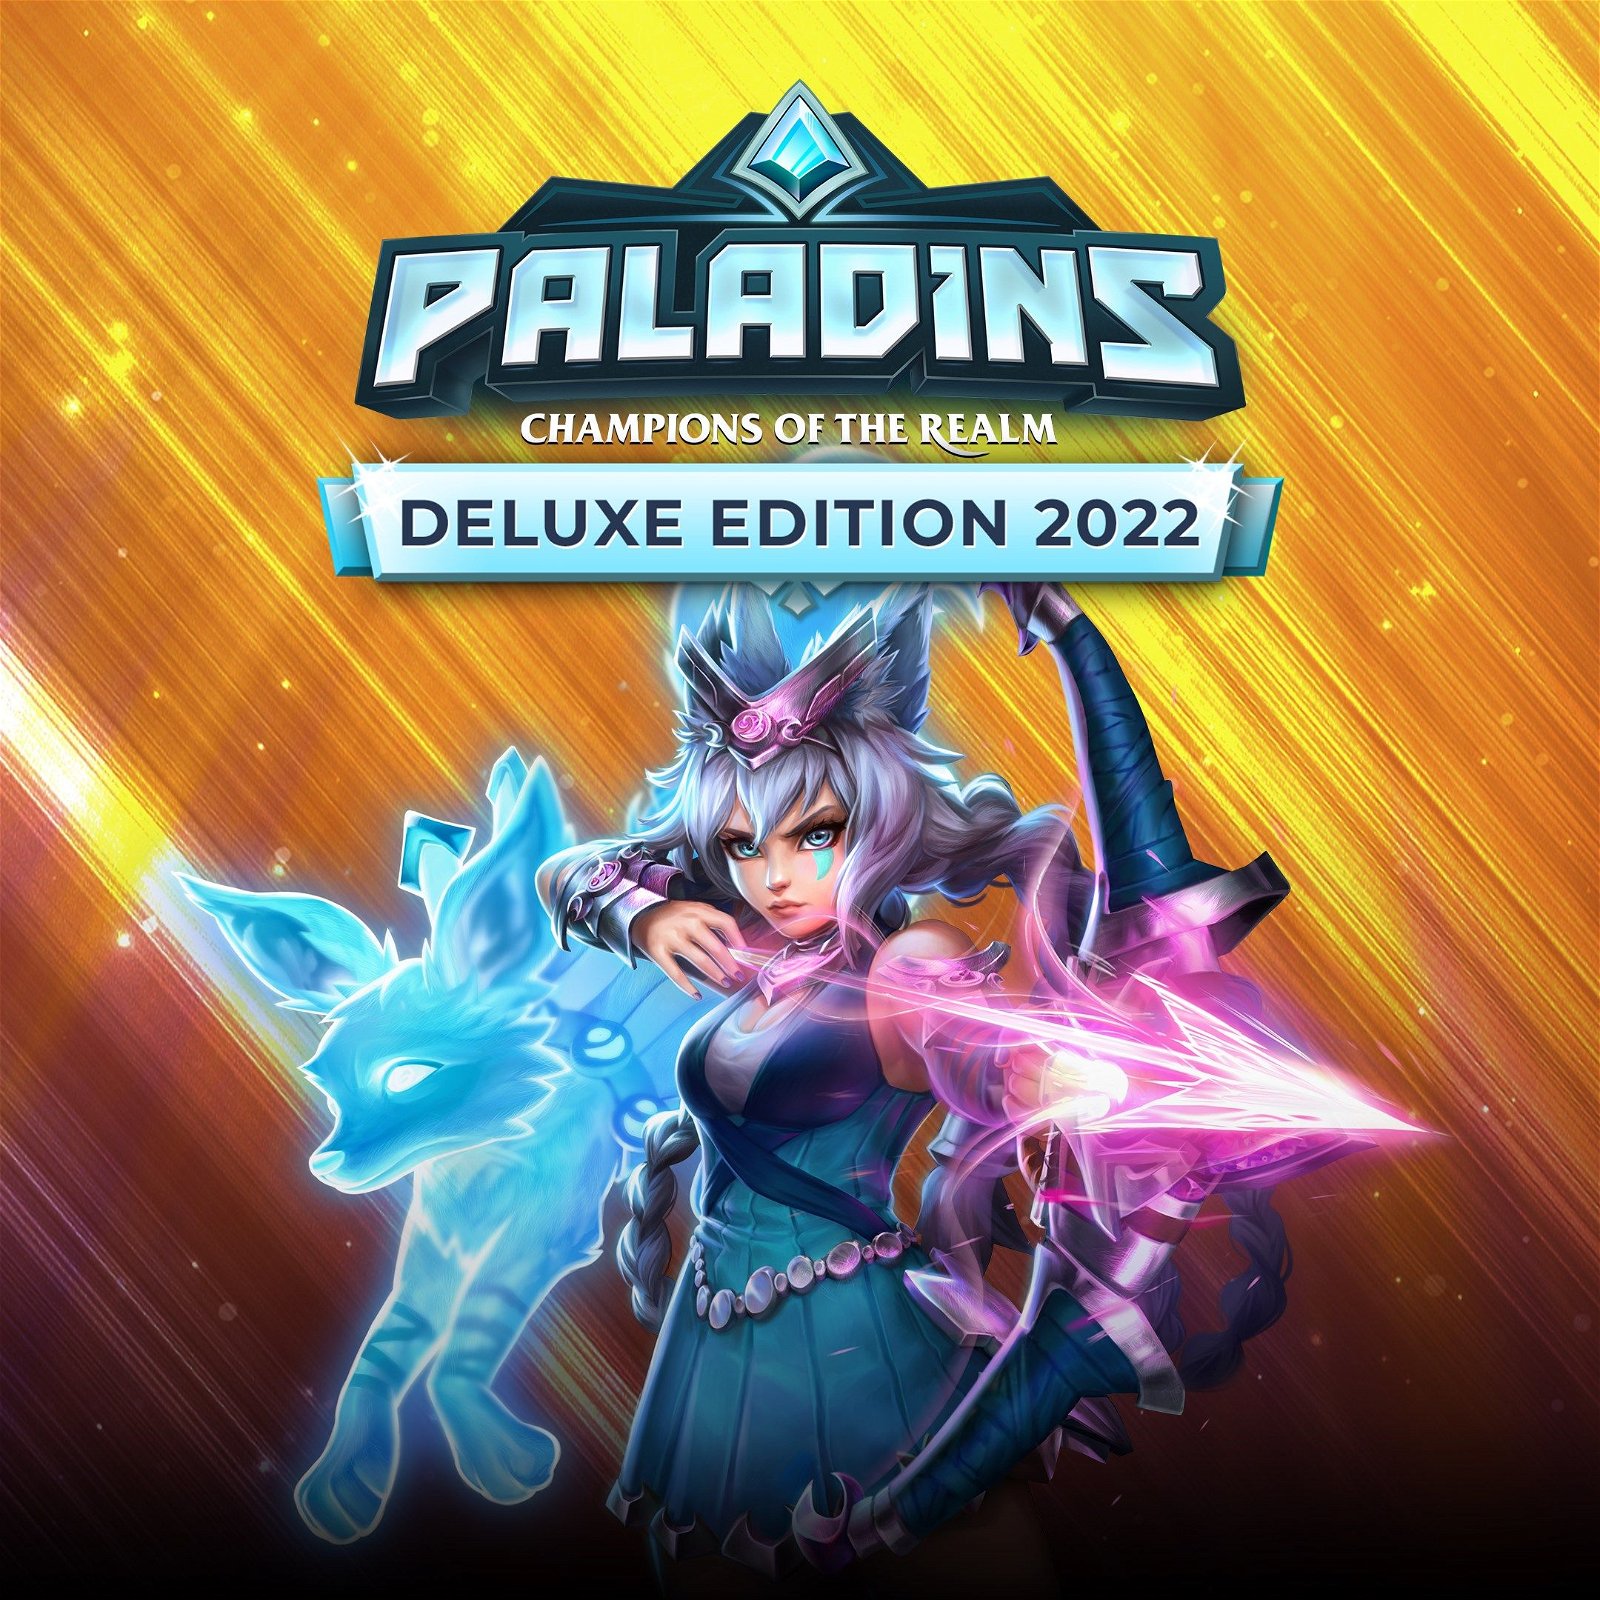 Image of Paladins Deluxe Edition